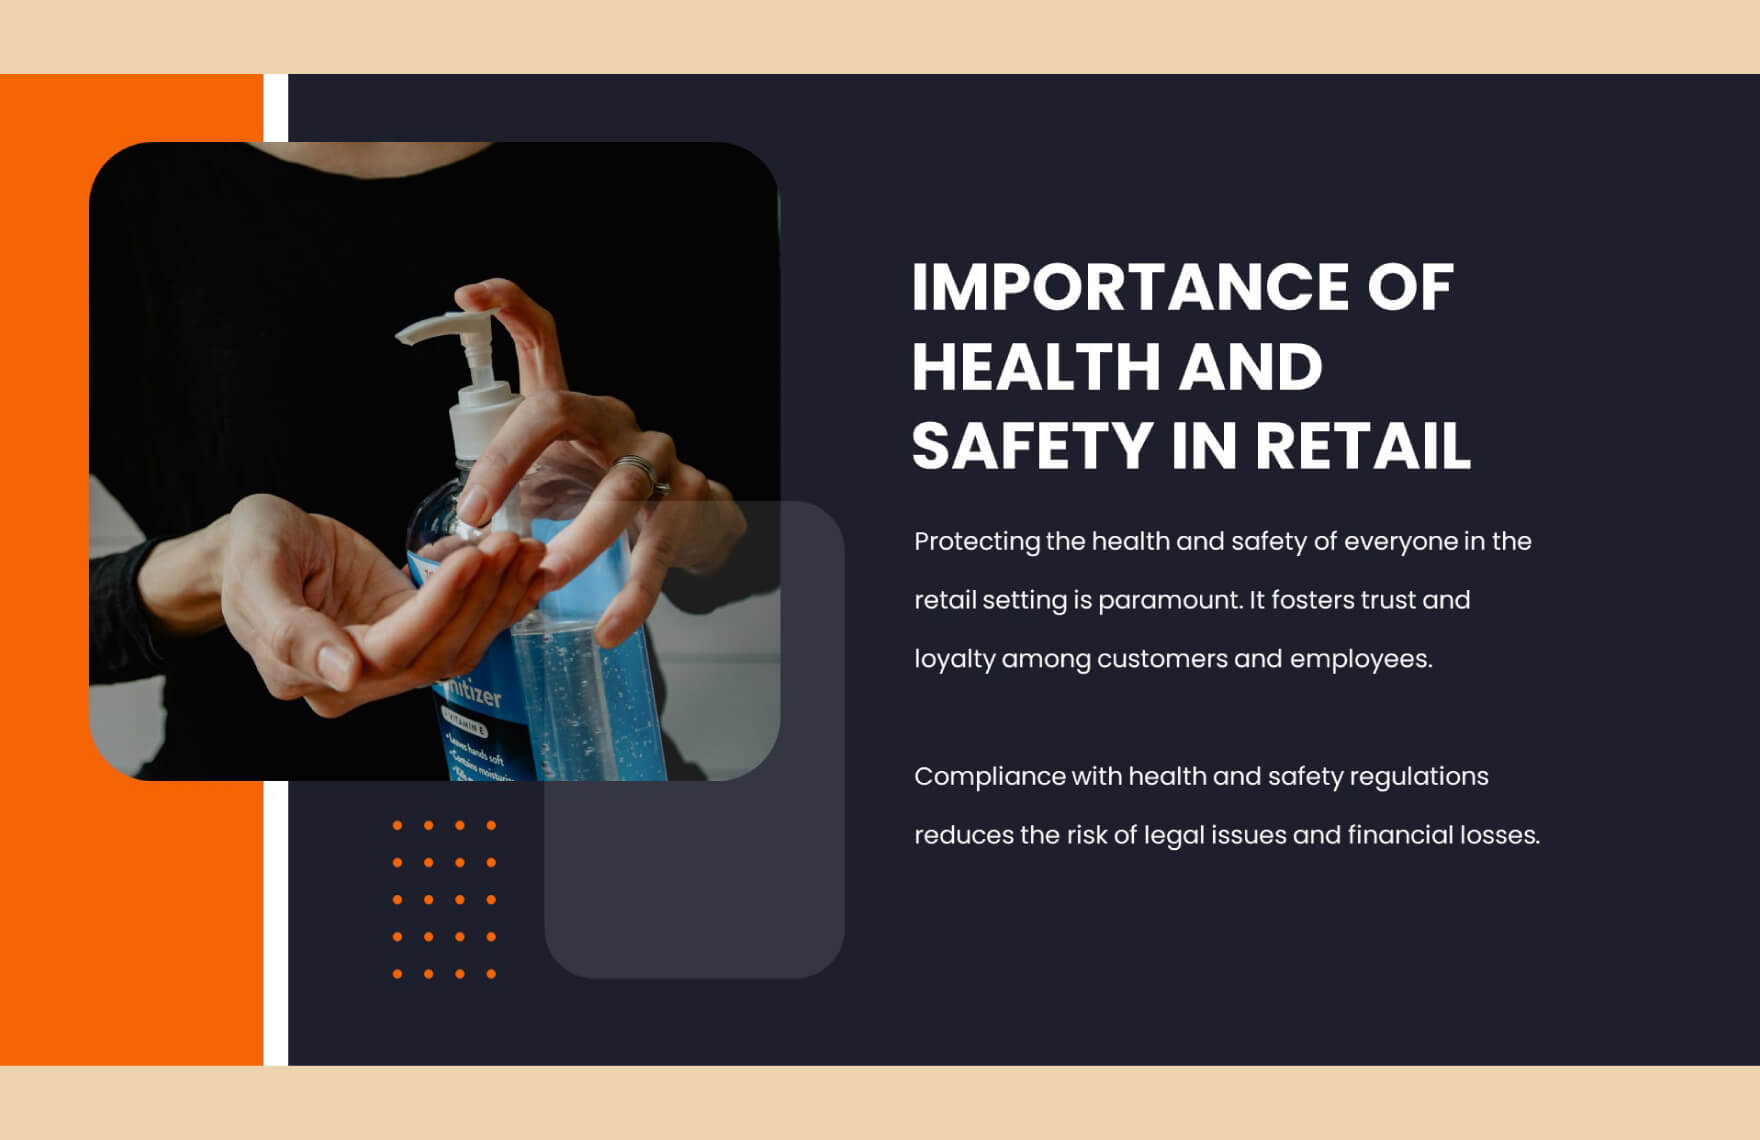 Health and Safety in Retail Stores PPT Template